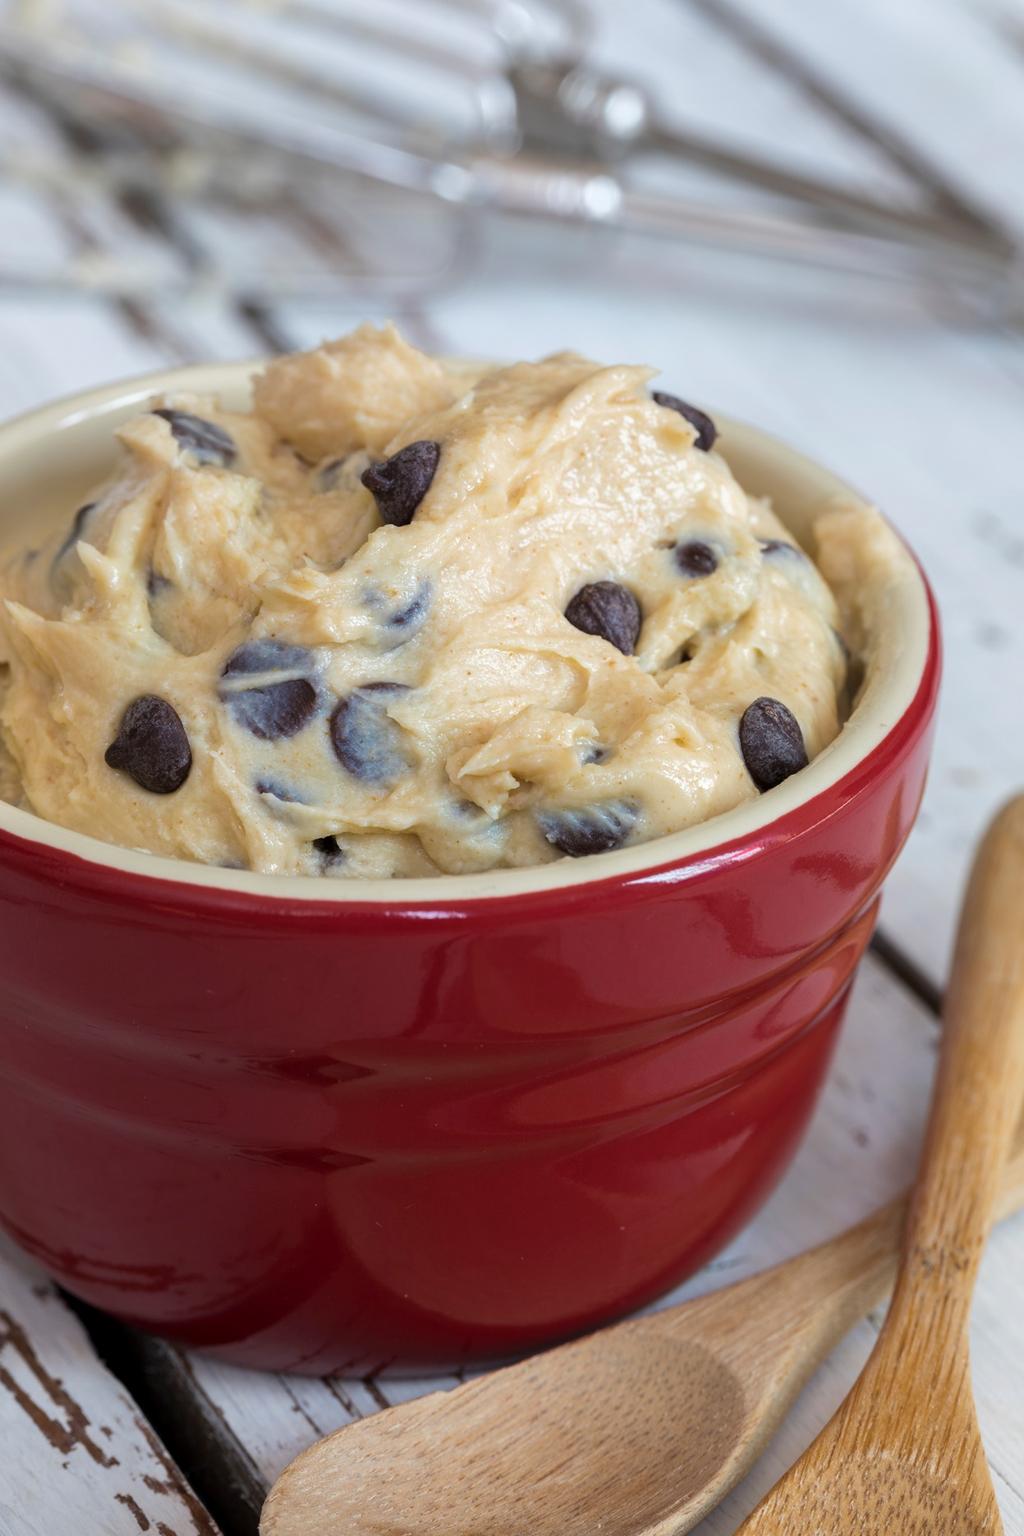 Cookie Dough Mousse Our cookie dough mousse recipe is perfect for when that hankering for cookie dough arises! It s completely egg-free, so go ahead, munch away! nutrition per serving 2 tbsp.